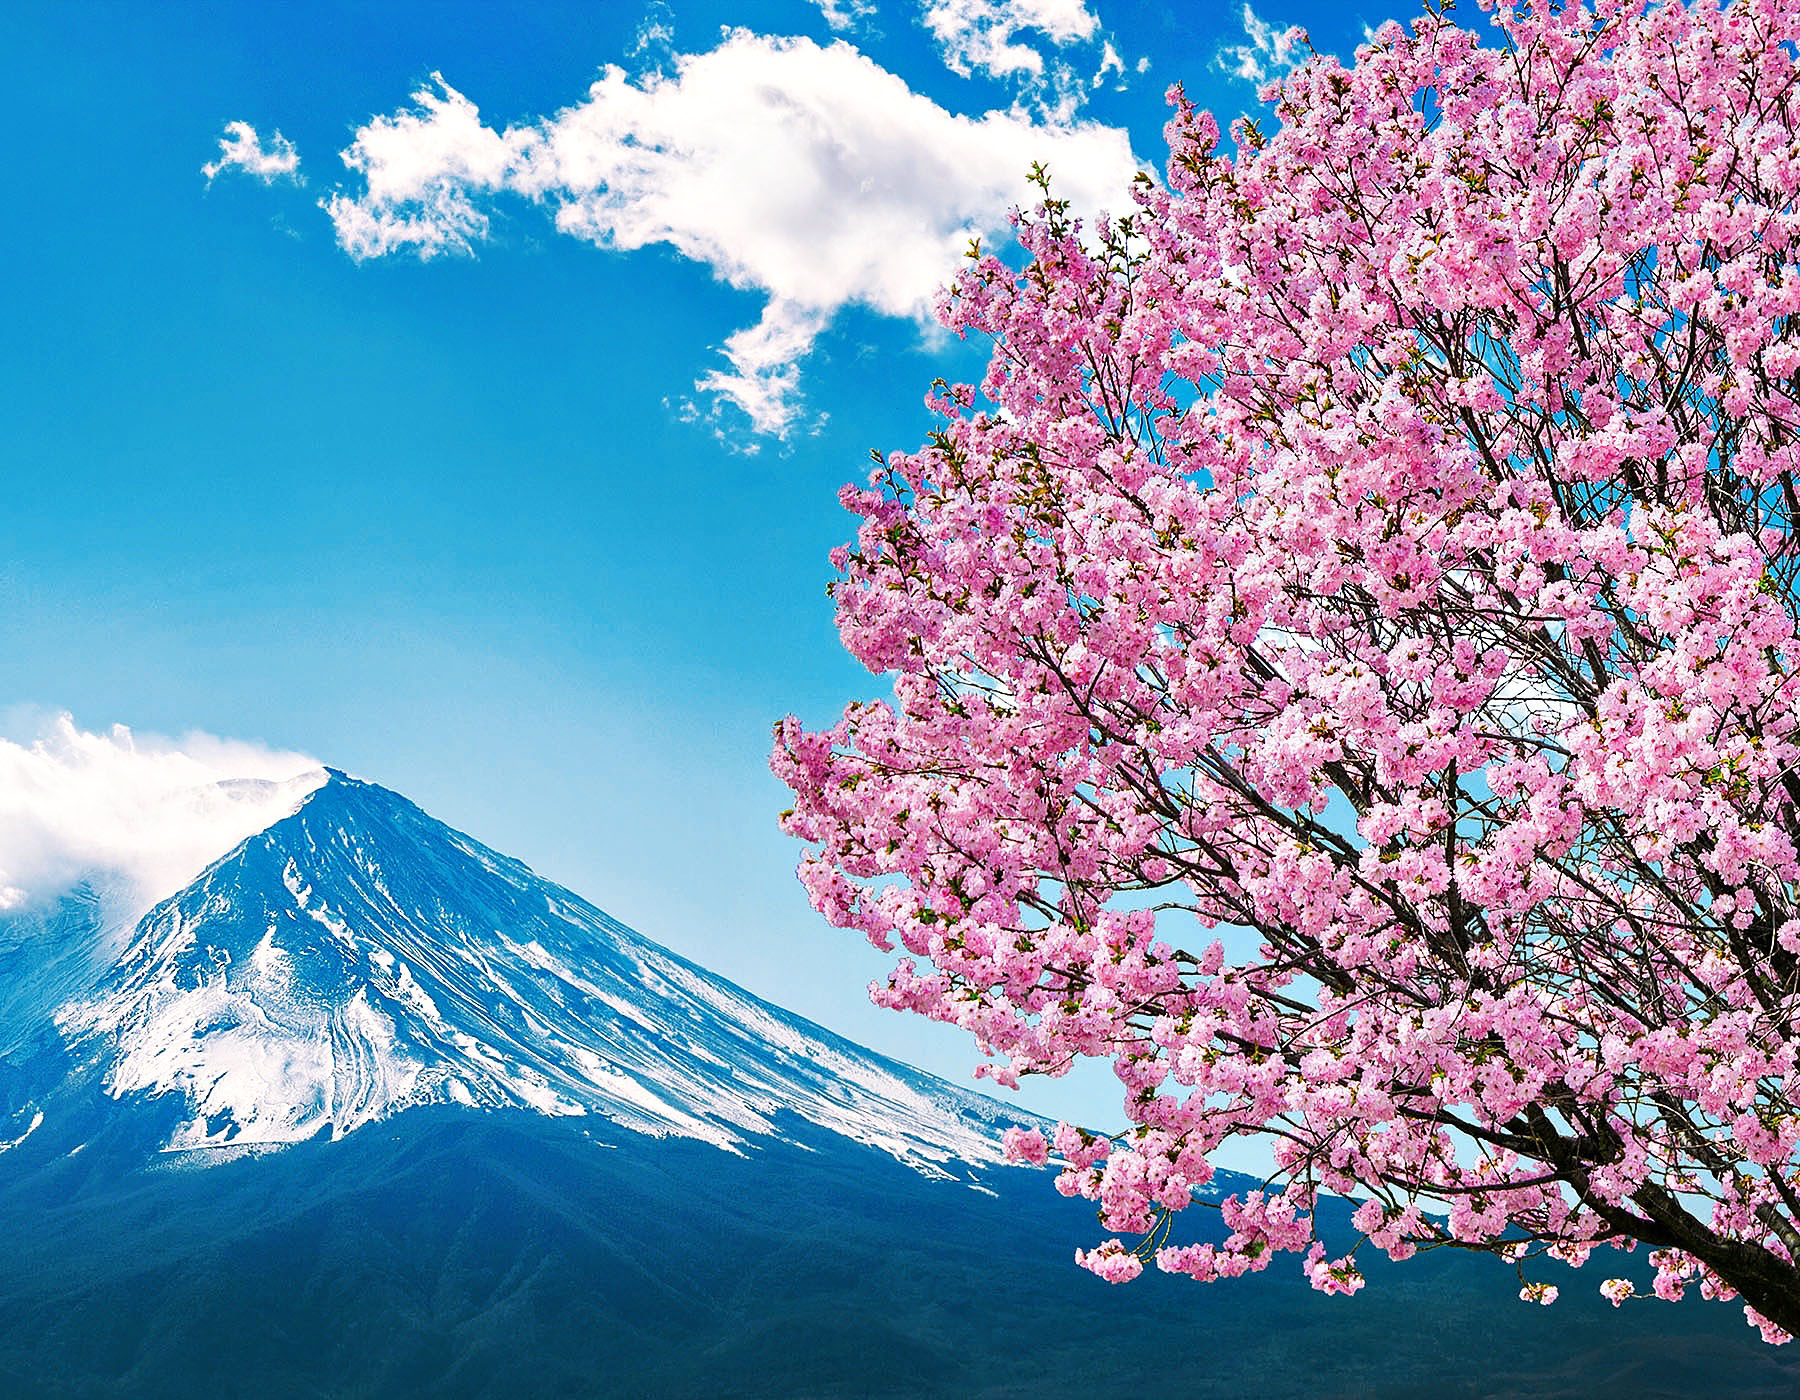 Fuji mountain and cherry blossoms in spring, Japan.